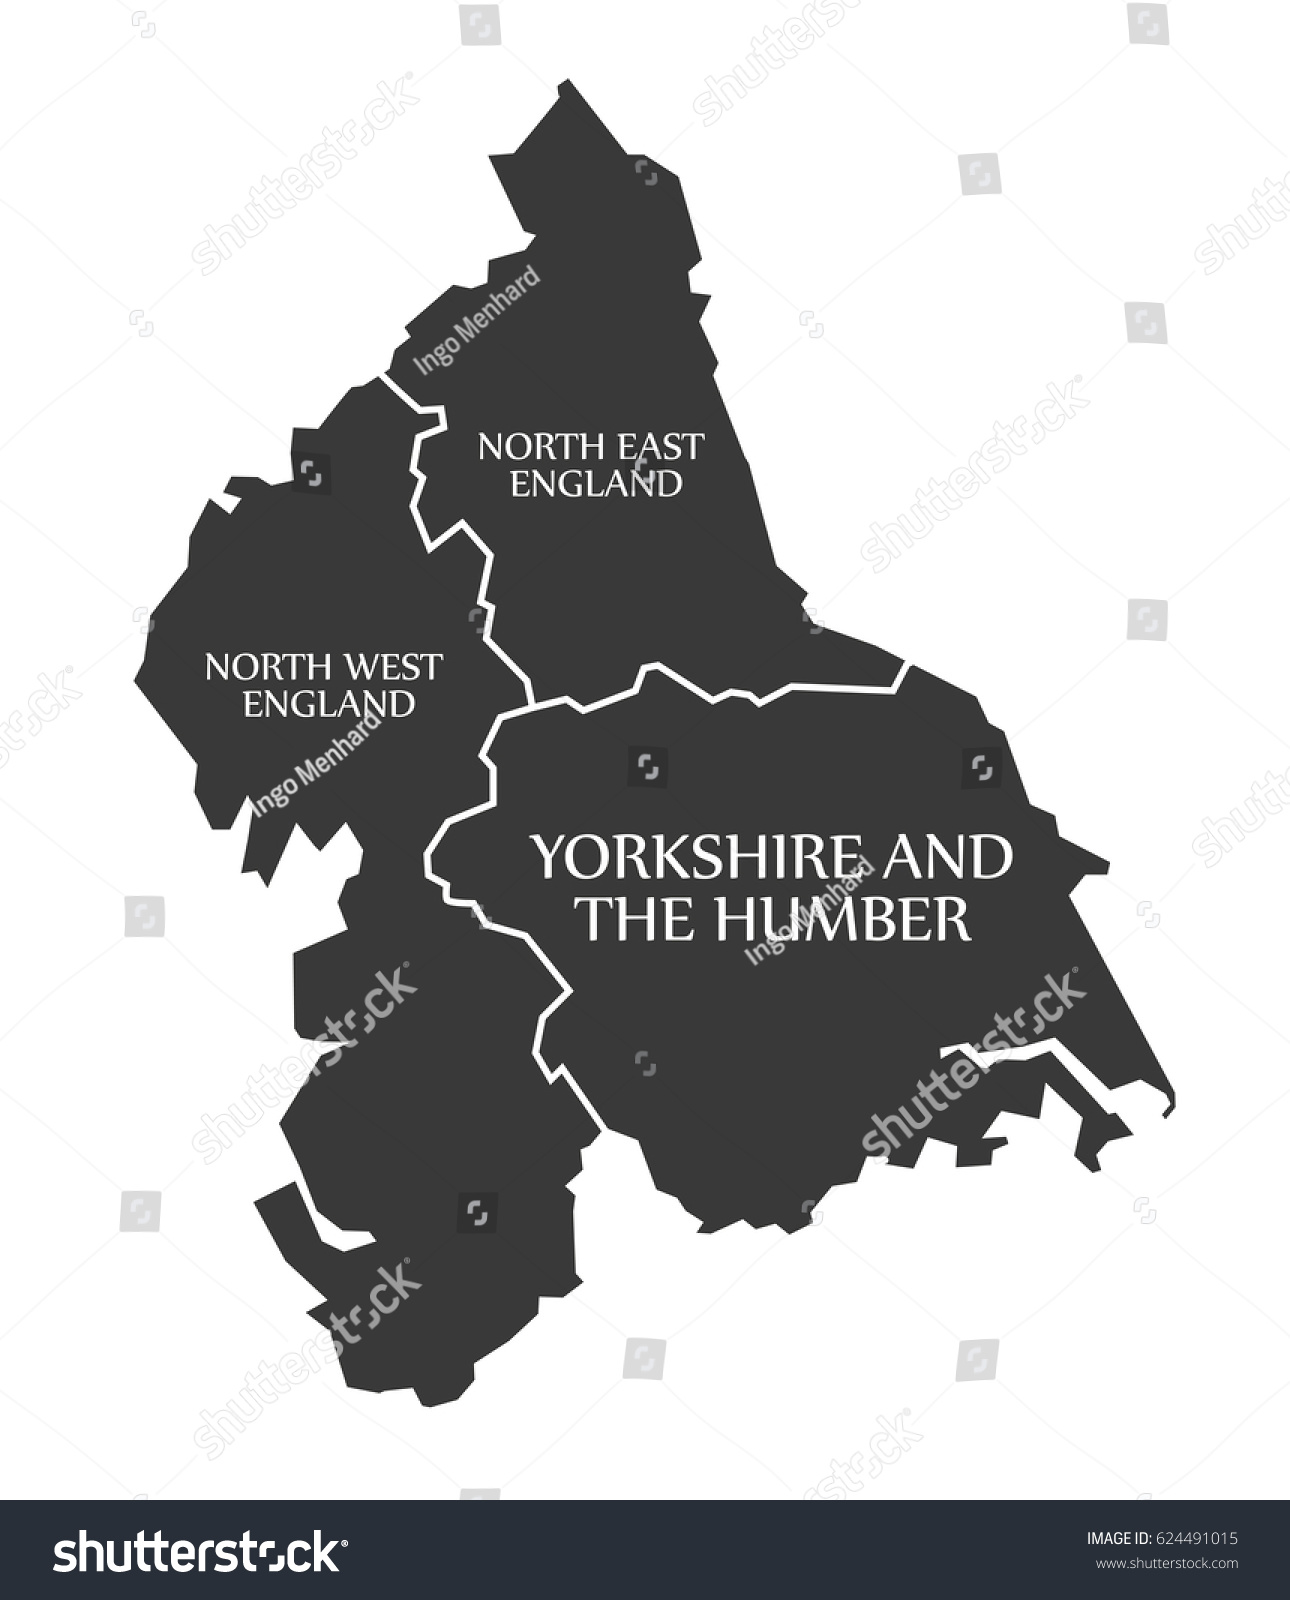 SVG of North East and North West England - Yorkshire and the Humber Map UK illustration svg